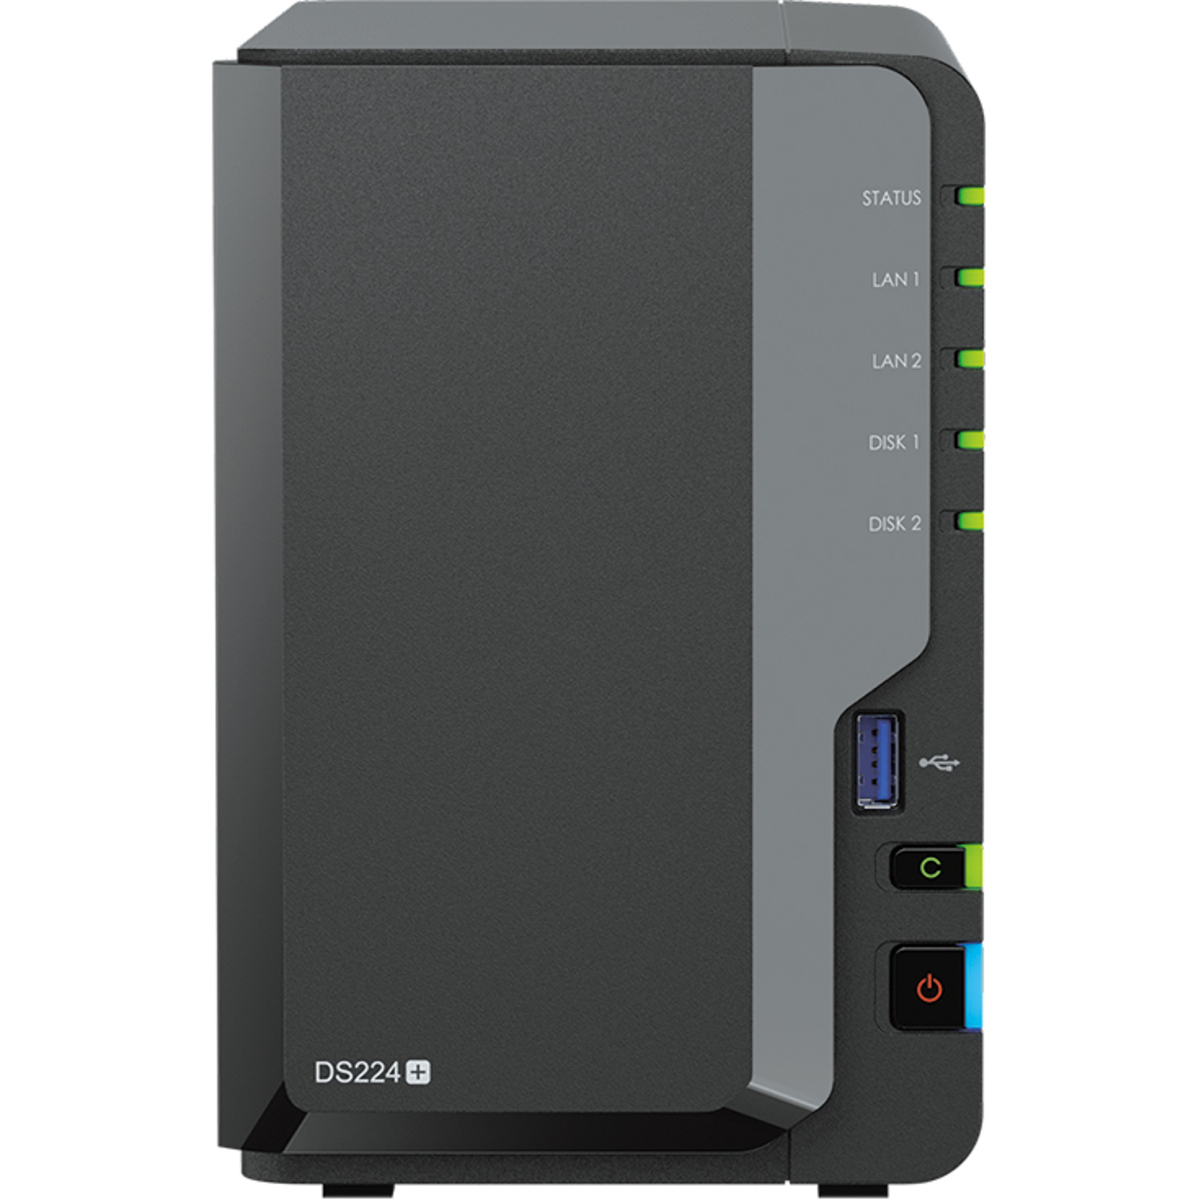 Synology DiskStation DS224+ Desktop 2-Bay Personal / Basic Home / Small Office NAS - Network Attached Storage Device Burn-In Tested Configurations - ON SALE - FREE RAM UPGRADE DiskStation DS224+